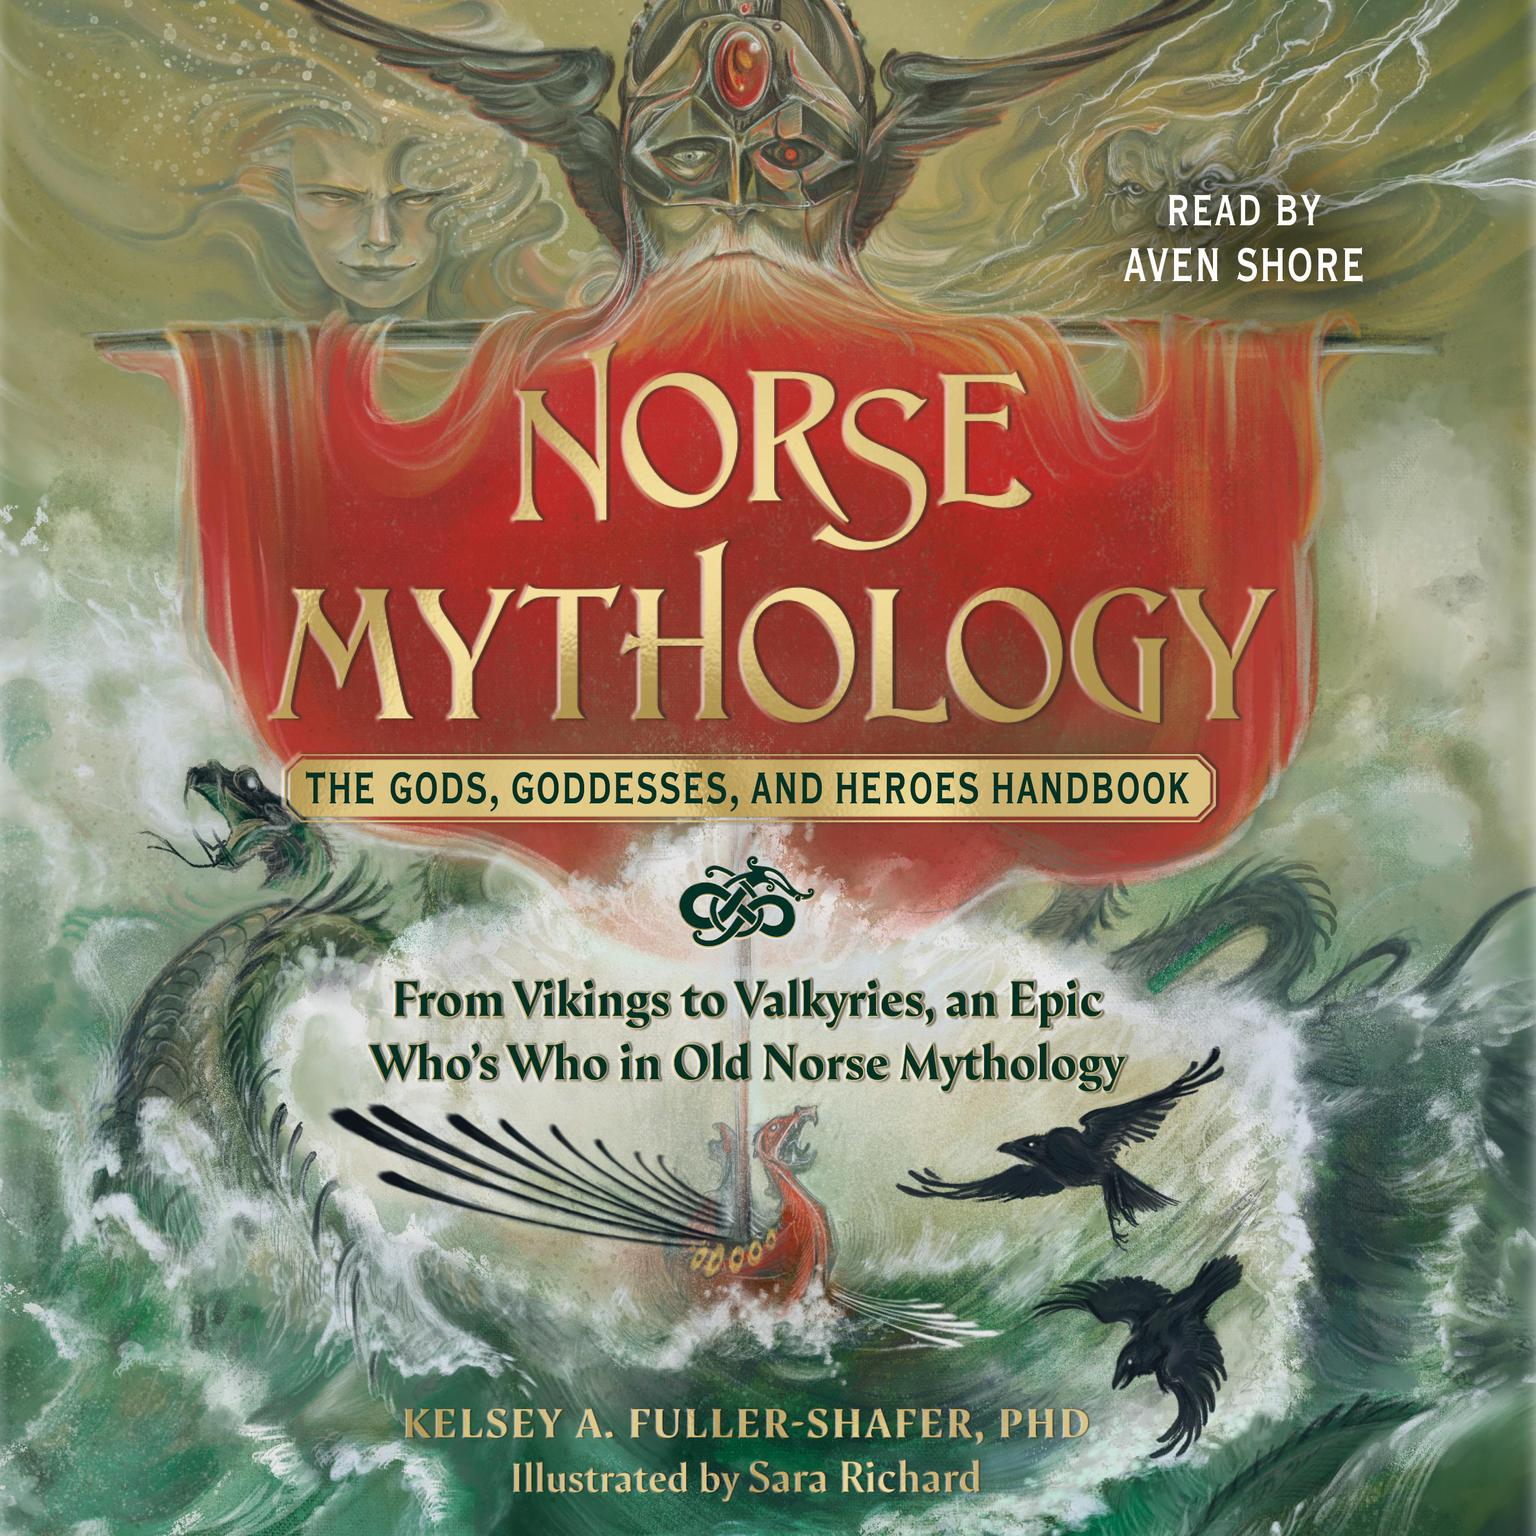 Norse Mythology: The Gods, Goddesses, and Heroes Handbook: From Vikings to Valkyries, an Epic Whos Who in Old Norse Mythology Audiobook, by Kelsey A. Fuller-Shafer